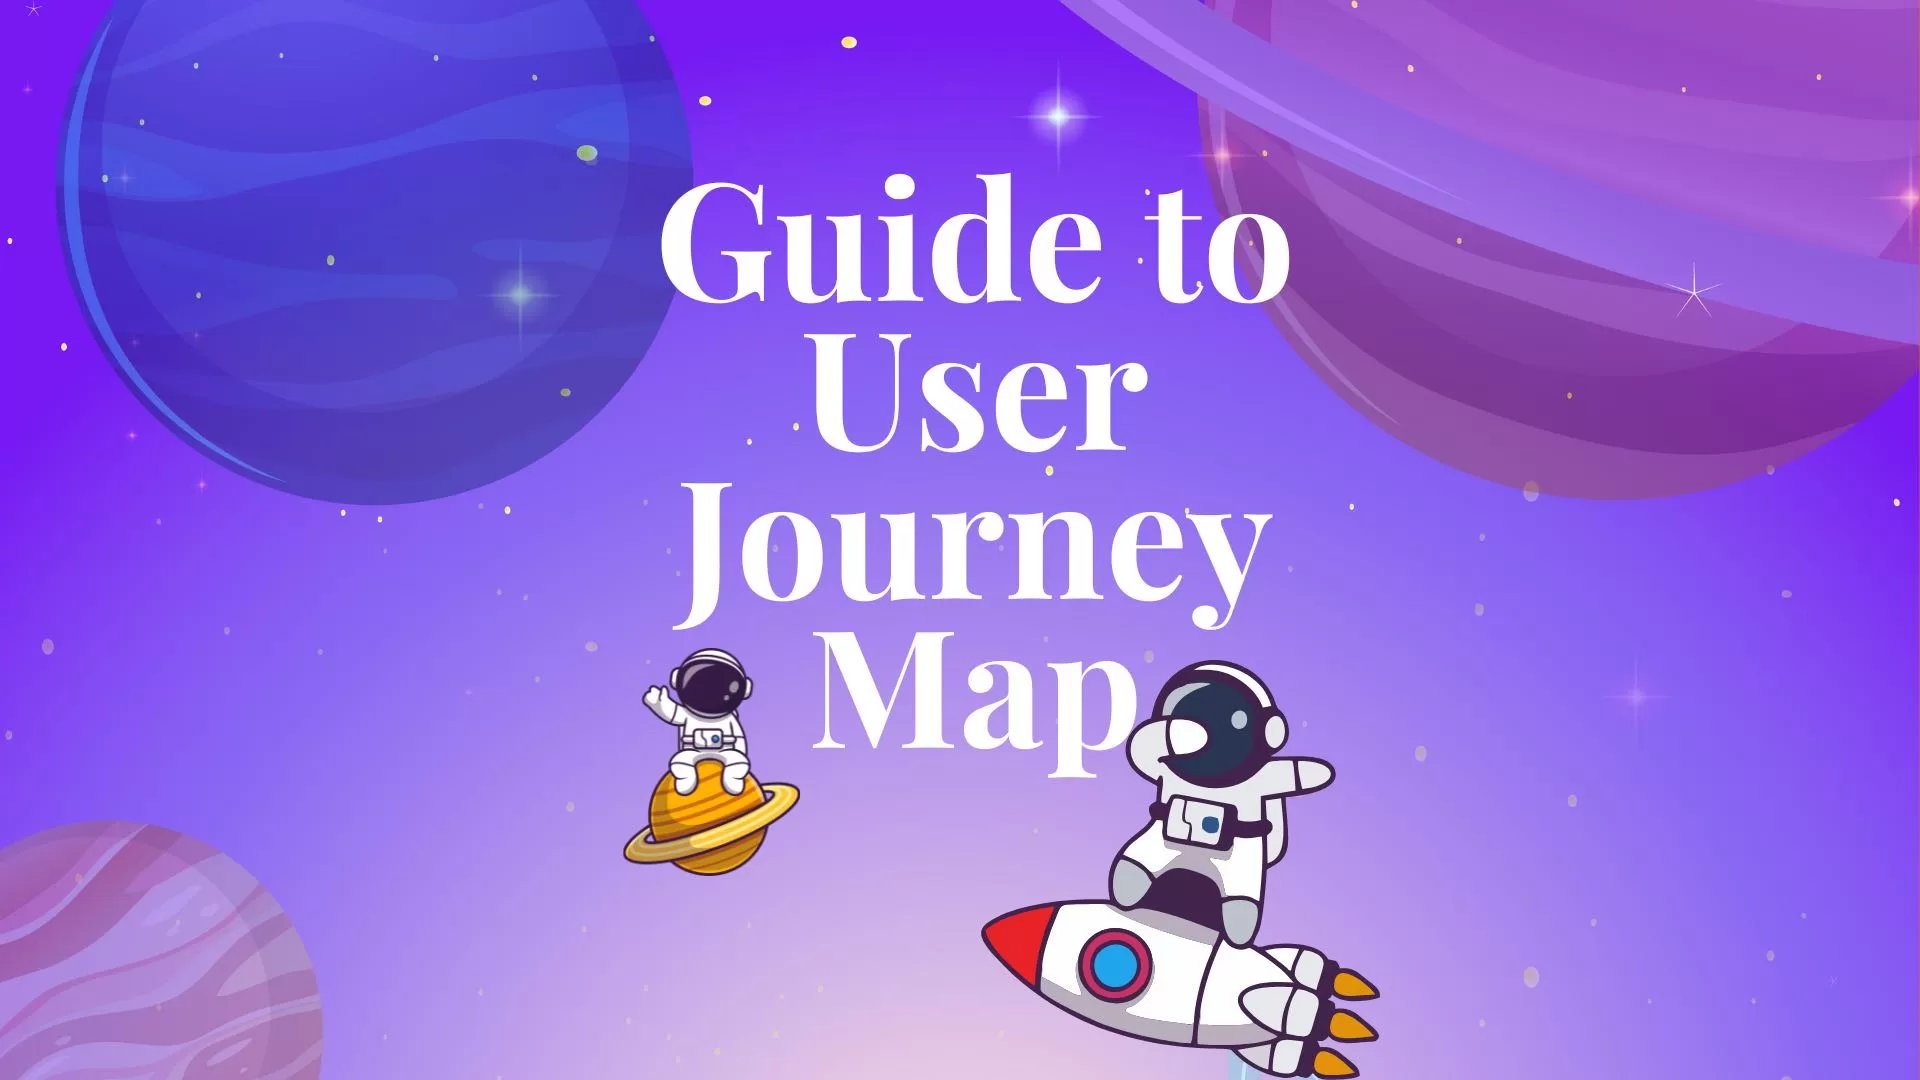 Guide to User Journey Map